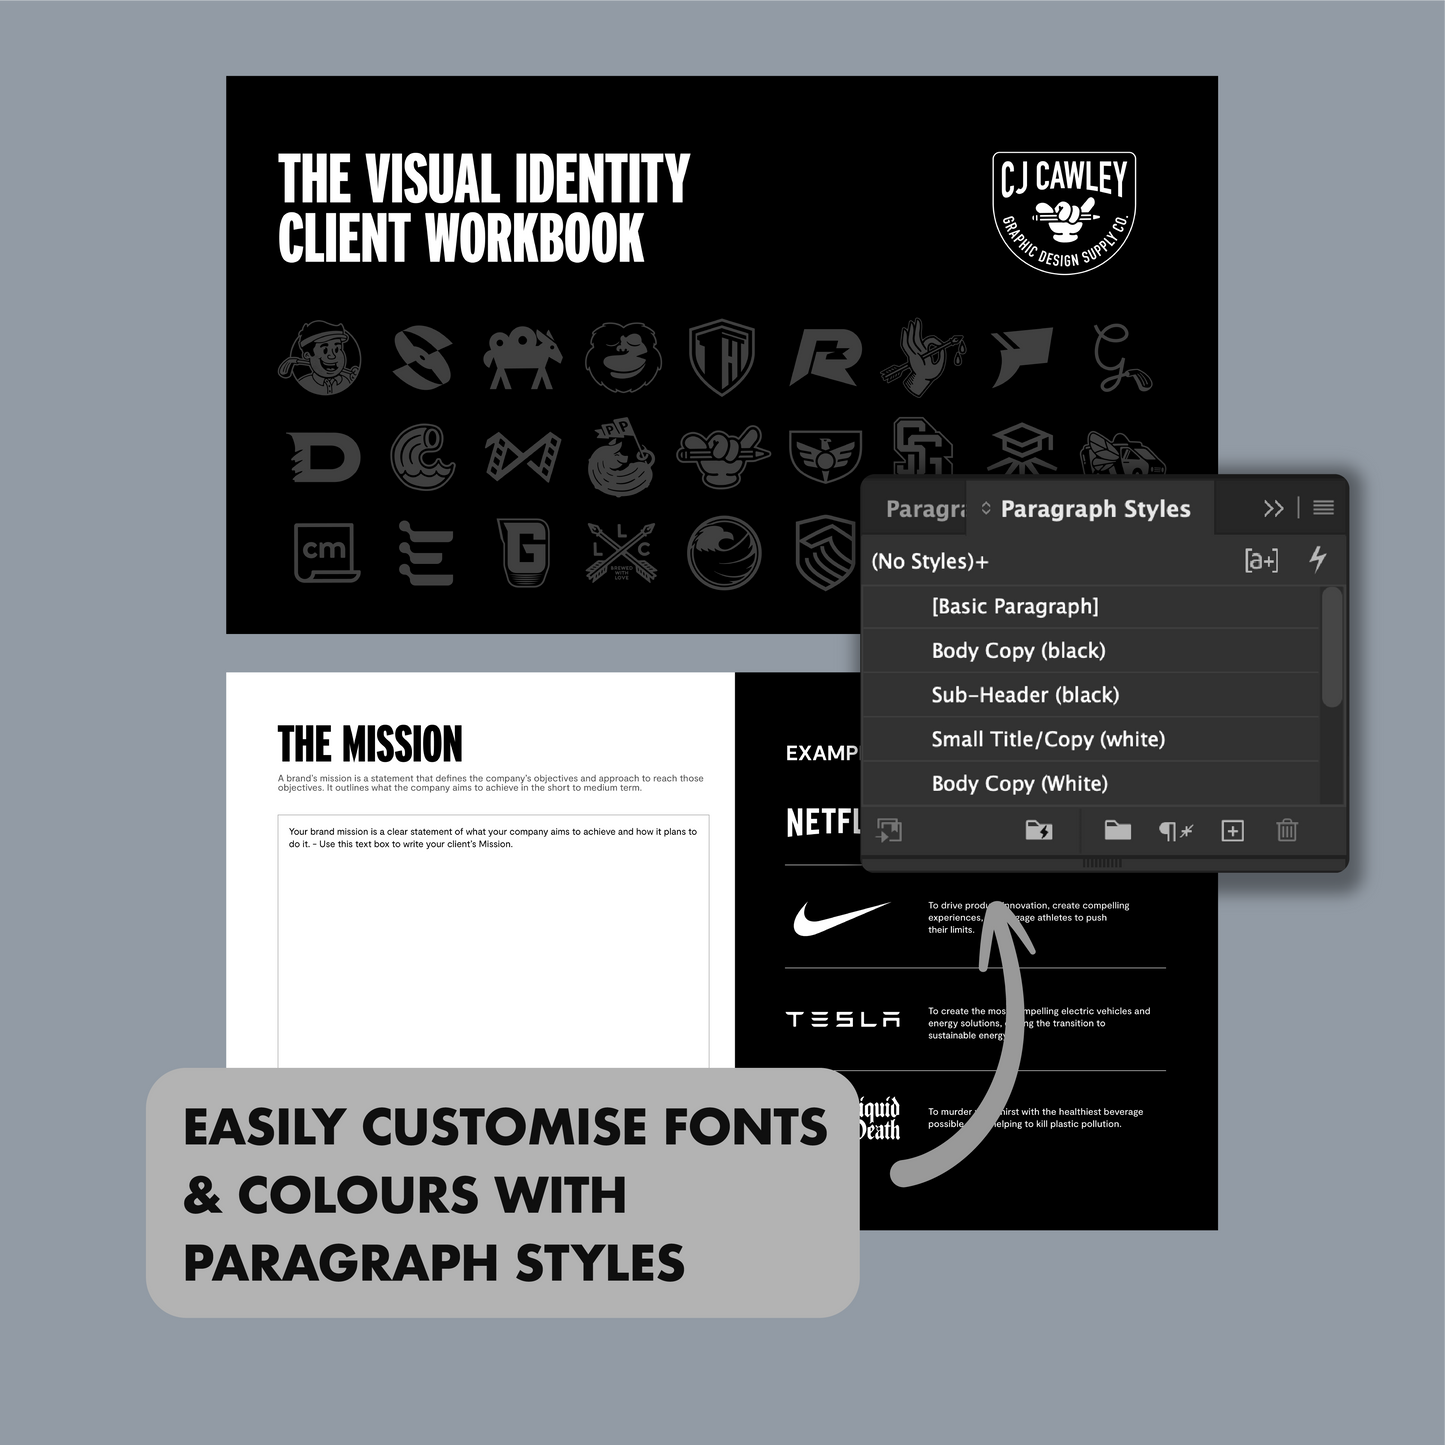 THE VISUAL IDENTITY CLIENT WORKBOOK TEMPLATE